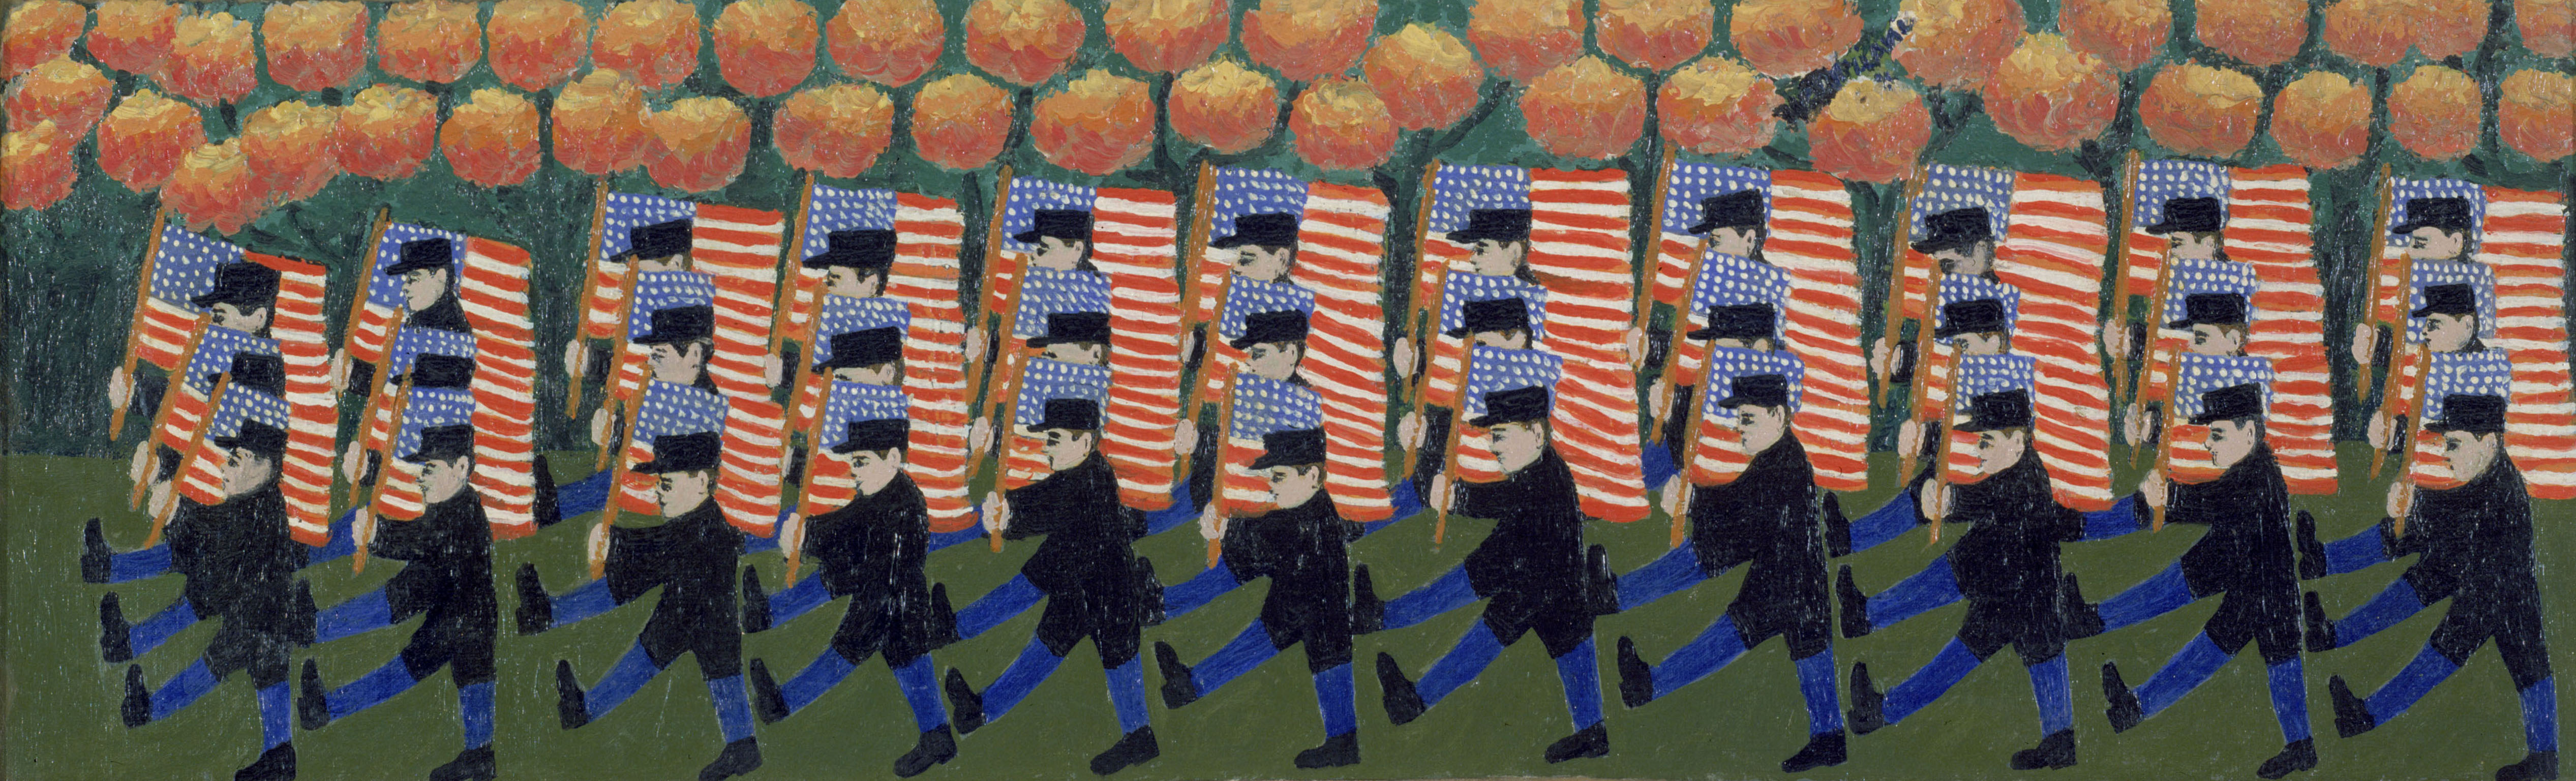 William Doriani (American, born Ukraine, 1891–1958), Flag Day, 1935, oil on canvas, The Museum of Modern Art, New York, The Sidney and Harriet Janis Collection. Digital Image © The Museum of Modern Art/Licensed by SCALA/Art Resource, New York.